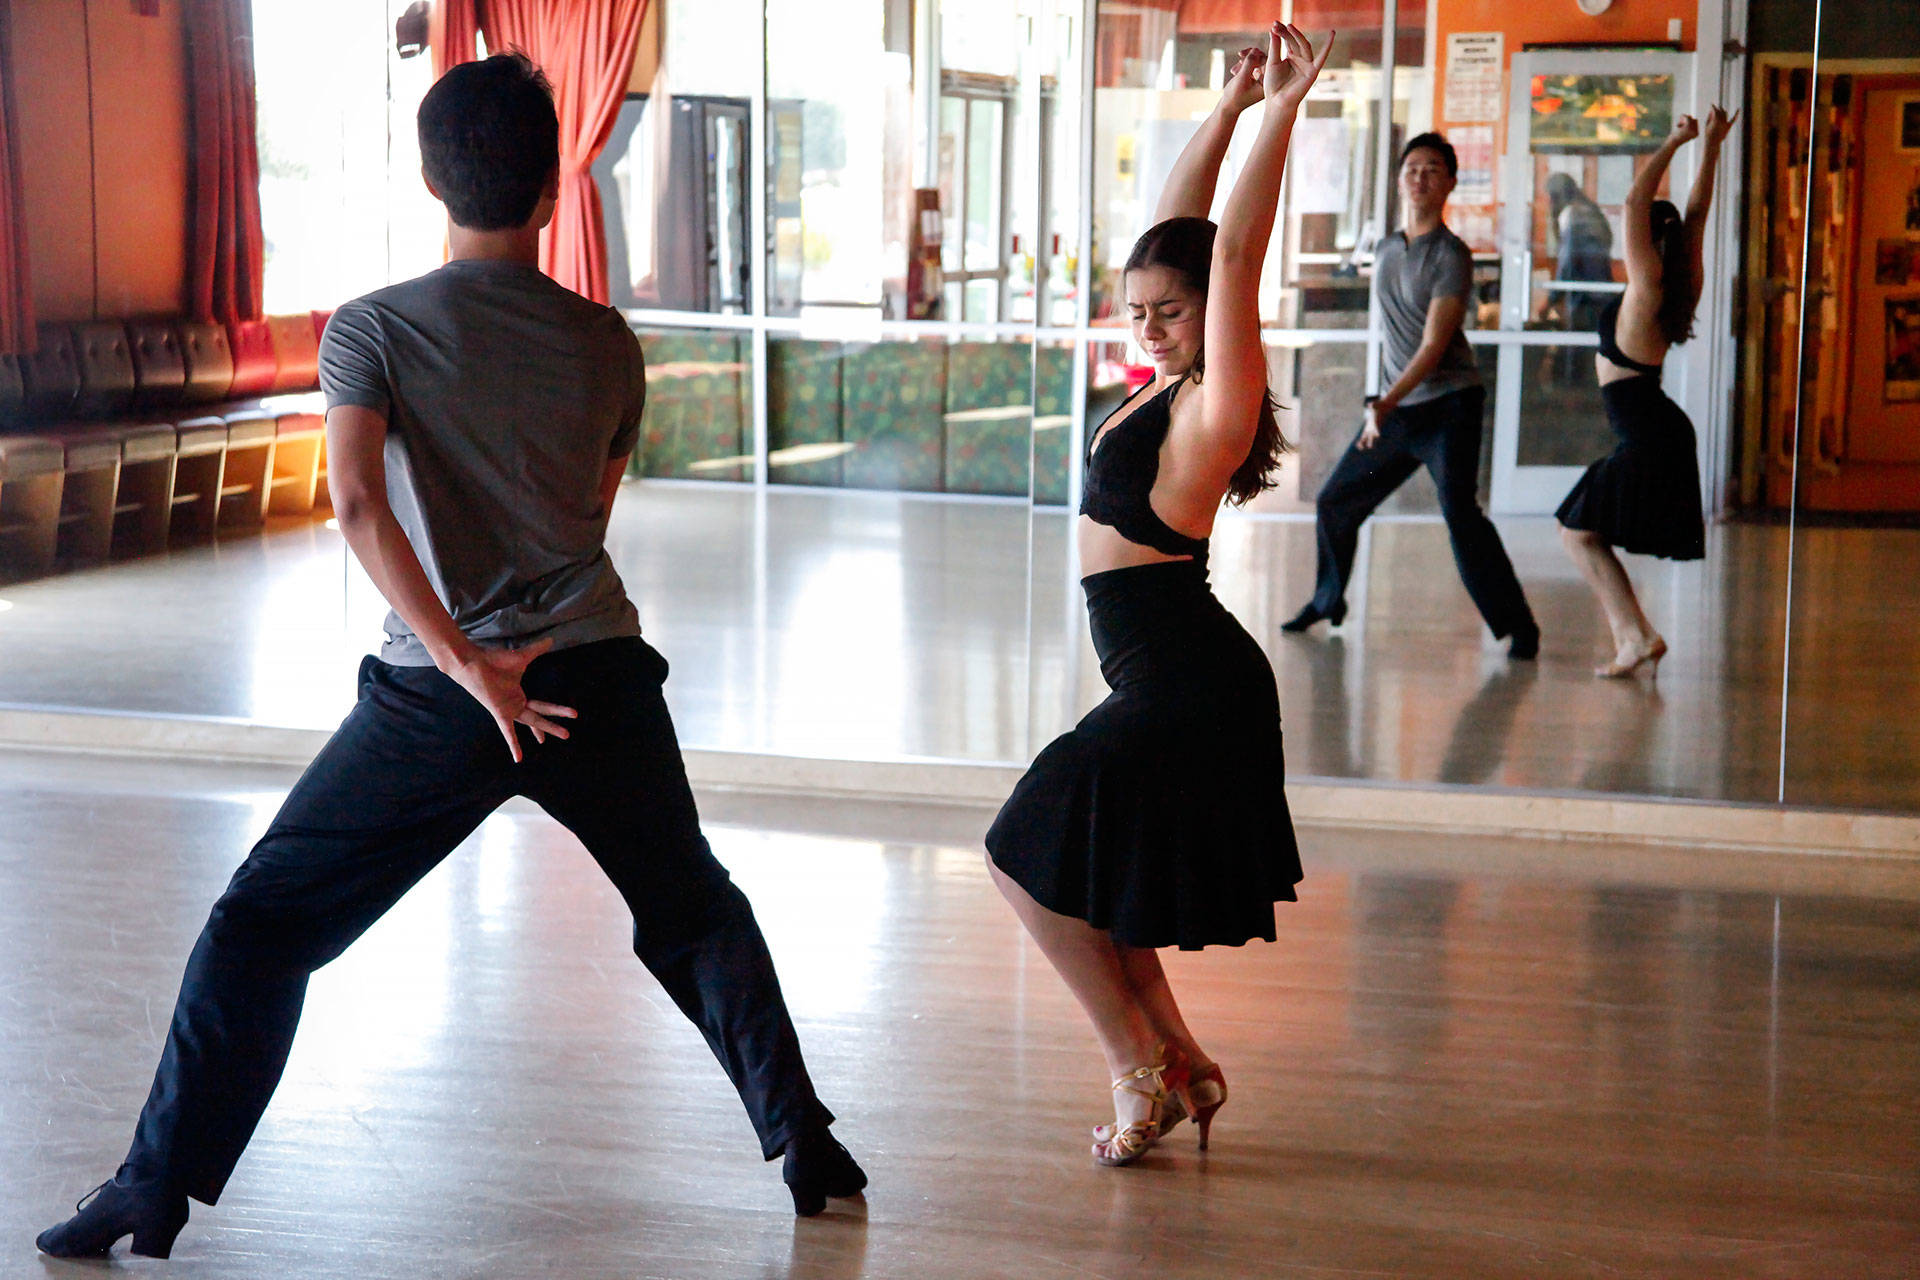 Bumchin Tegshjargal started dancing with his partner. Michelle Klets, a year and a half ago. In that short time, they’ve become one of the country’s top young couples in Latin dance.  Brittany Hosea-Small/KQED